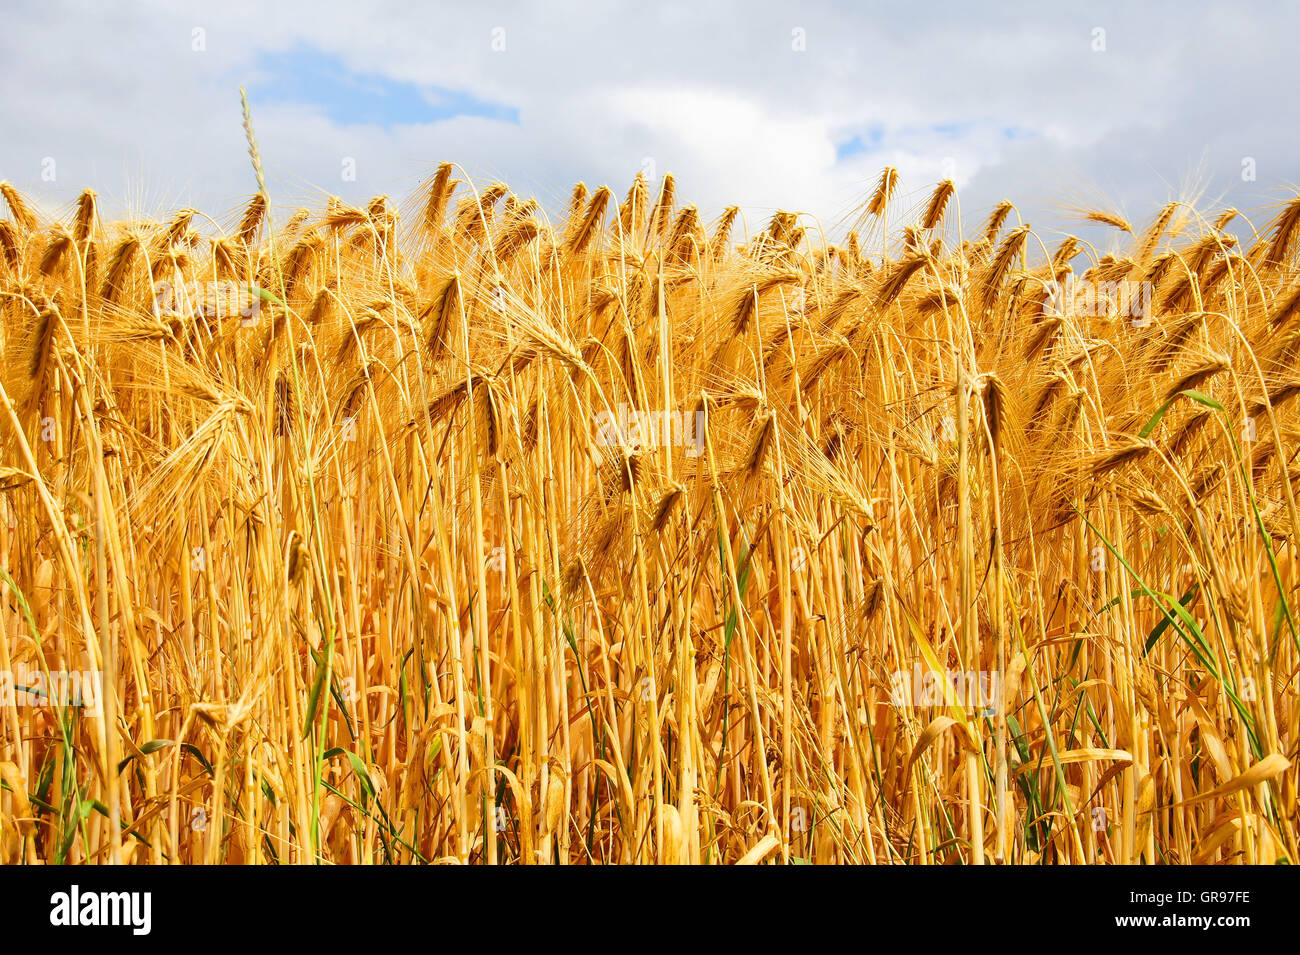 Ripe Barley From The Low-Angle Shot Stock Photo